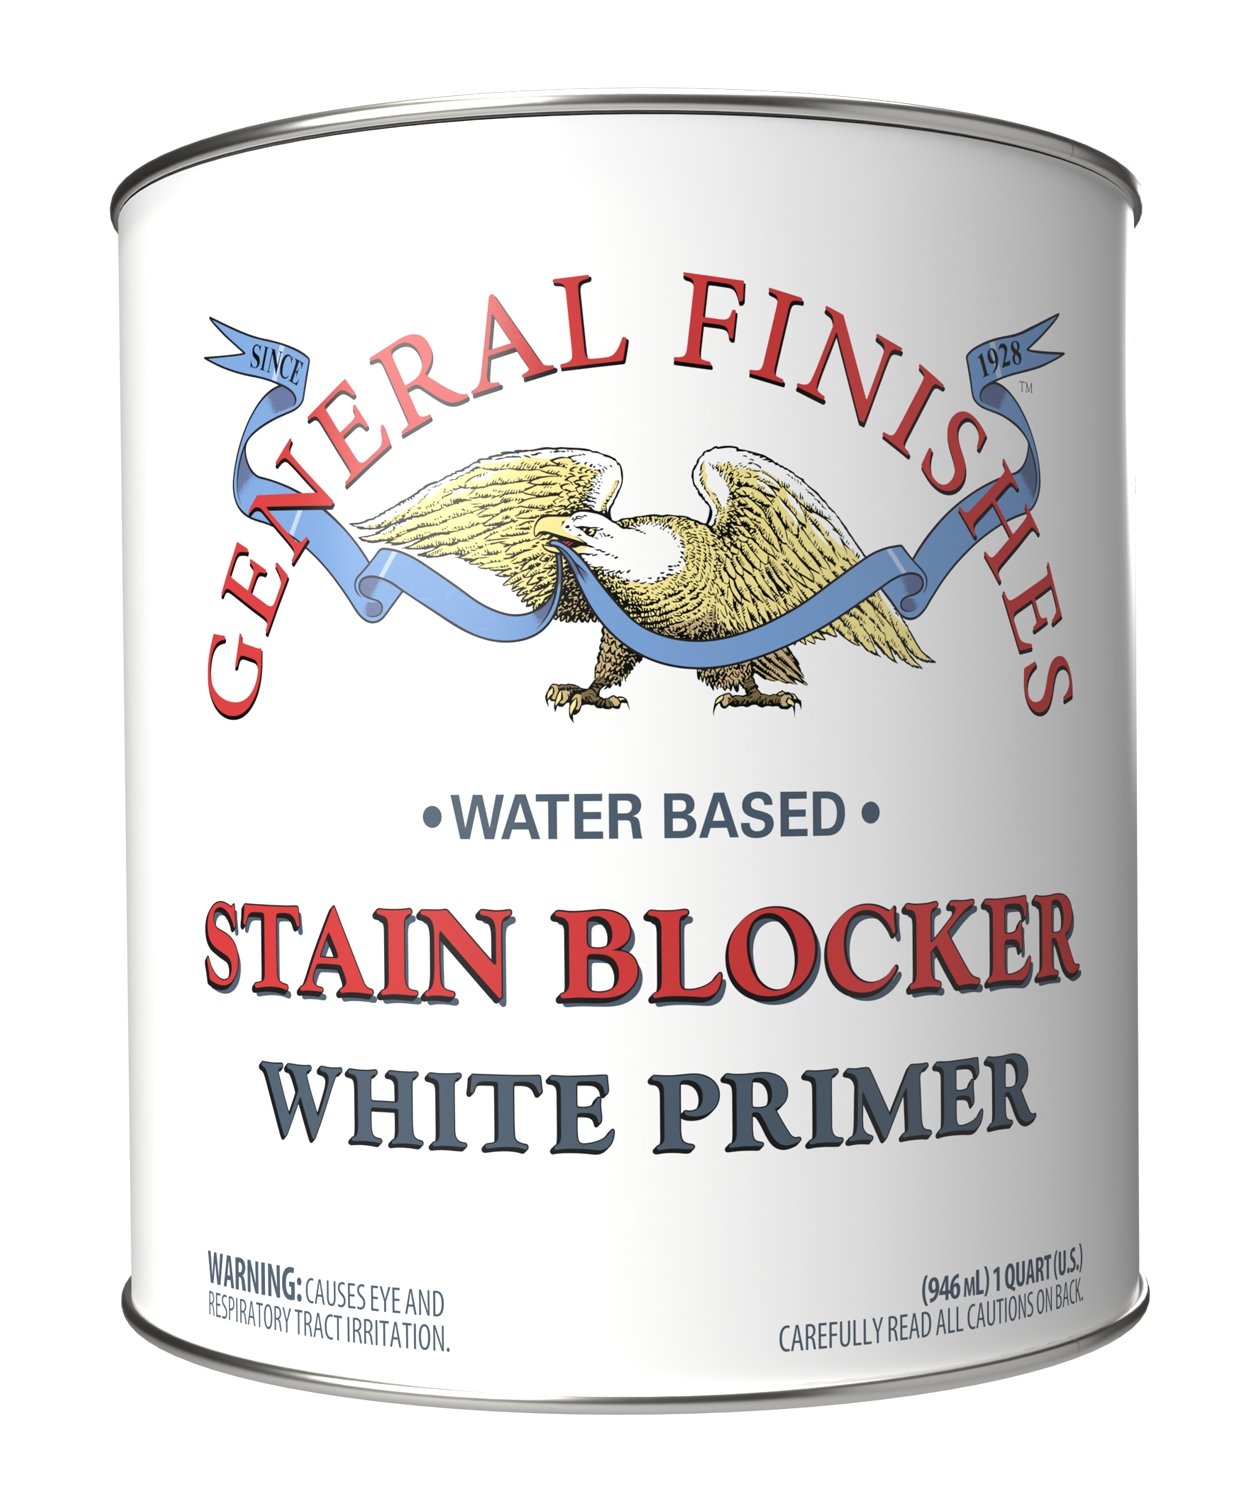 General Finishes Empire Red Water Based Dye Stain, Pint